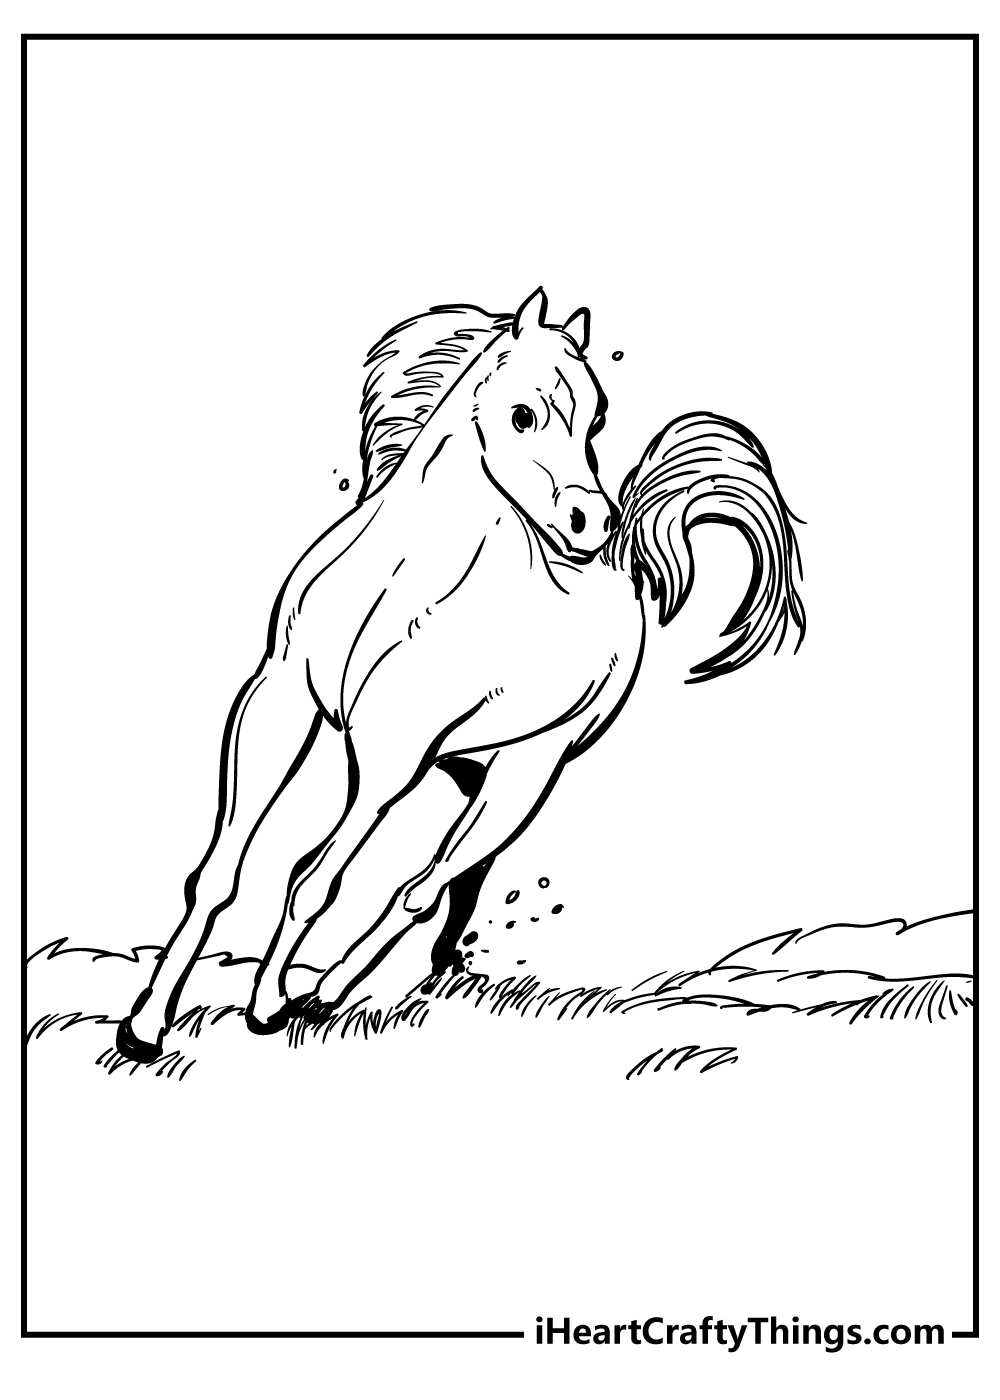 Charming Horse Coloring Pages free printable